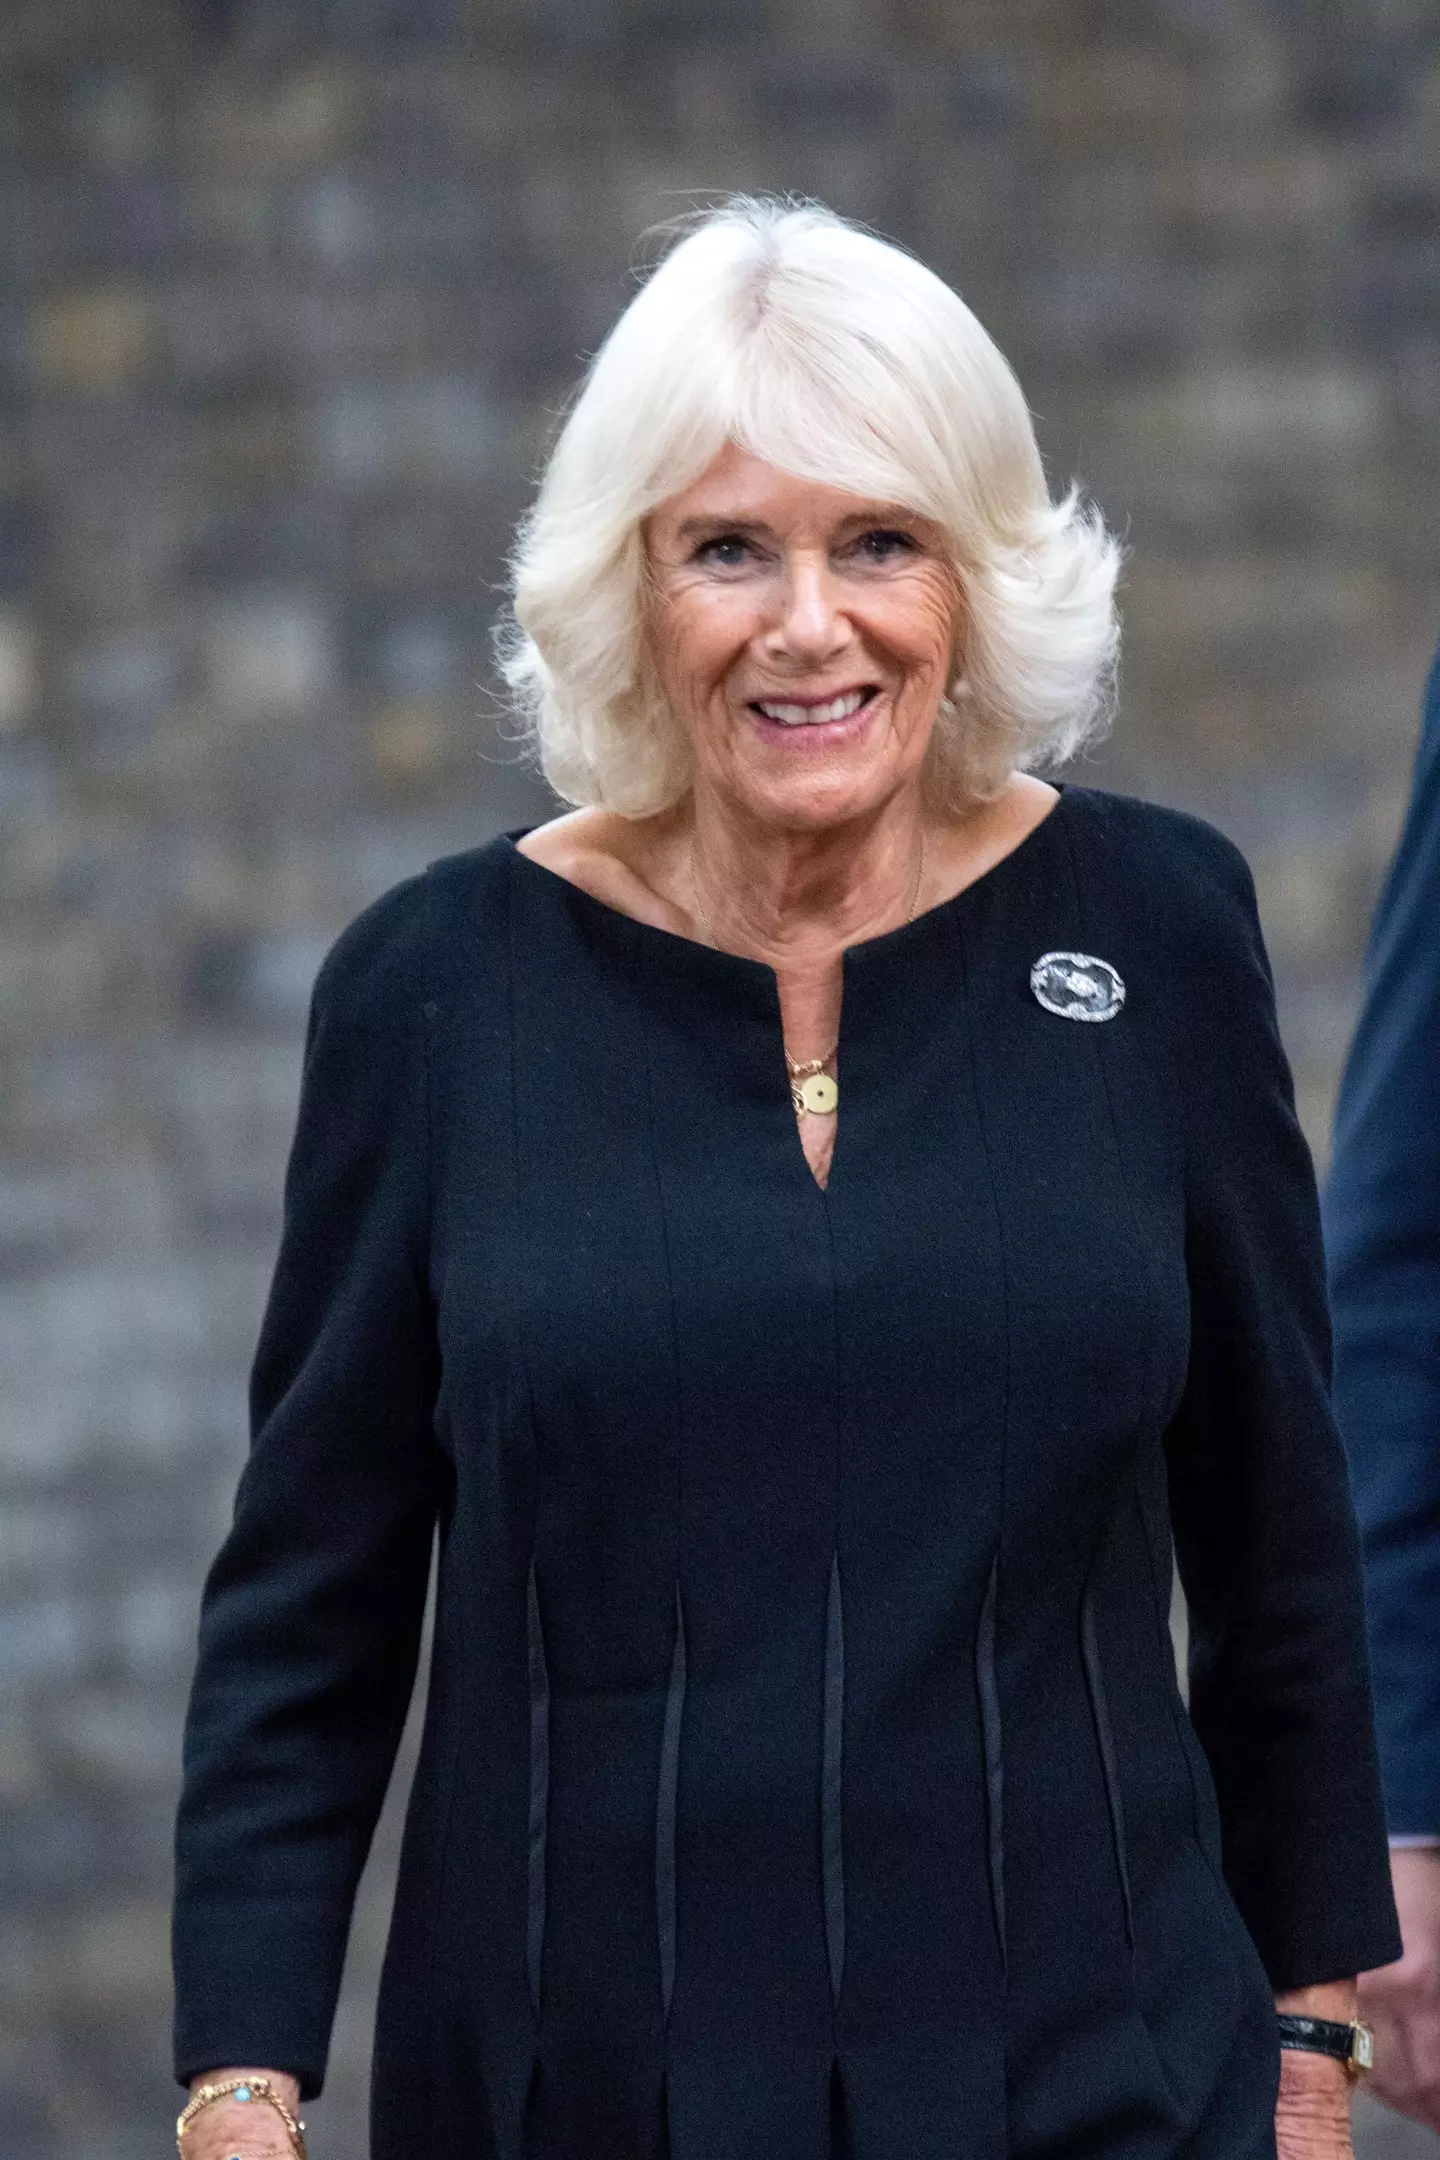 Camilla will be known as Queen once she's anointed.